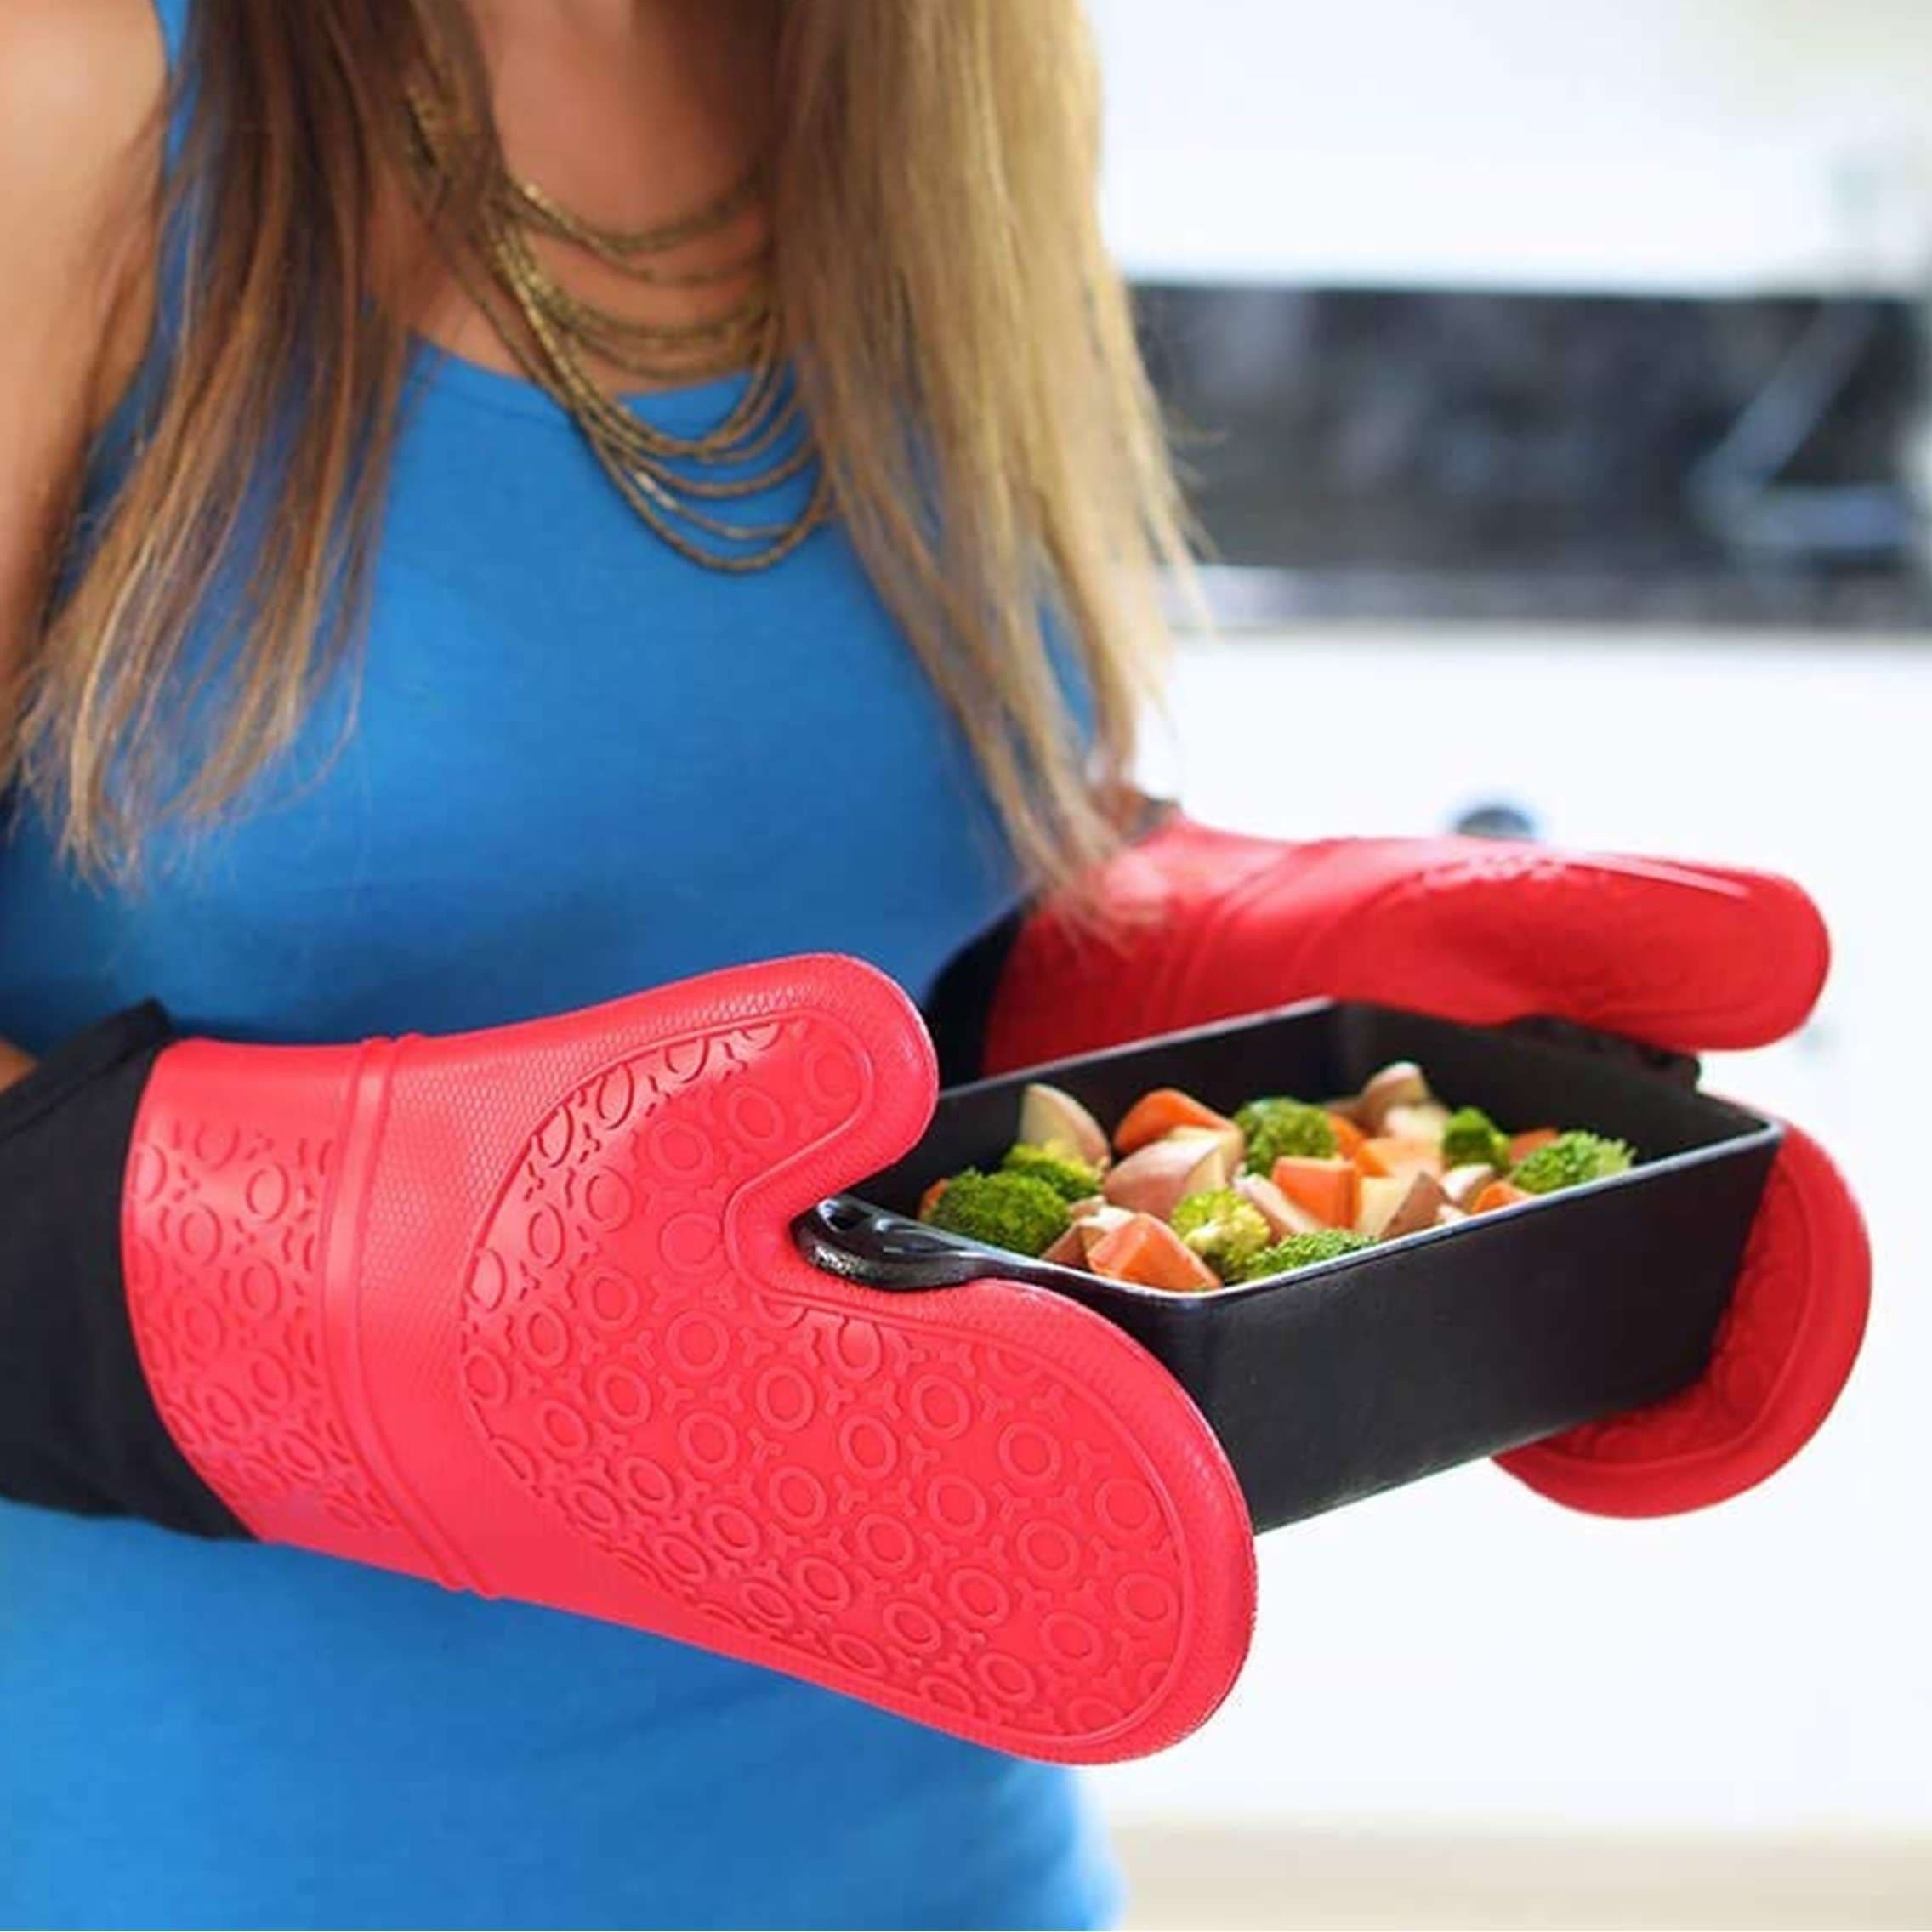 https://ak1.ostkcdn.com/images/products/is/images/direct/e7e00ebbfe00060c54521b7fe6254b32d7366831/STYLISH-Heat-Resistant-Silicone-Mitts.jpg